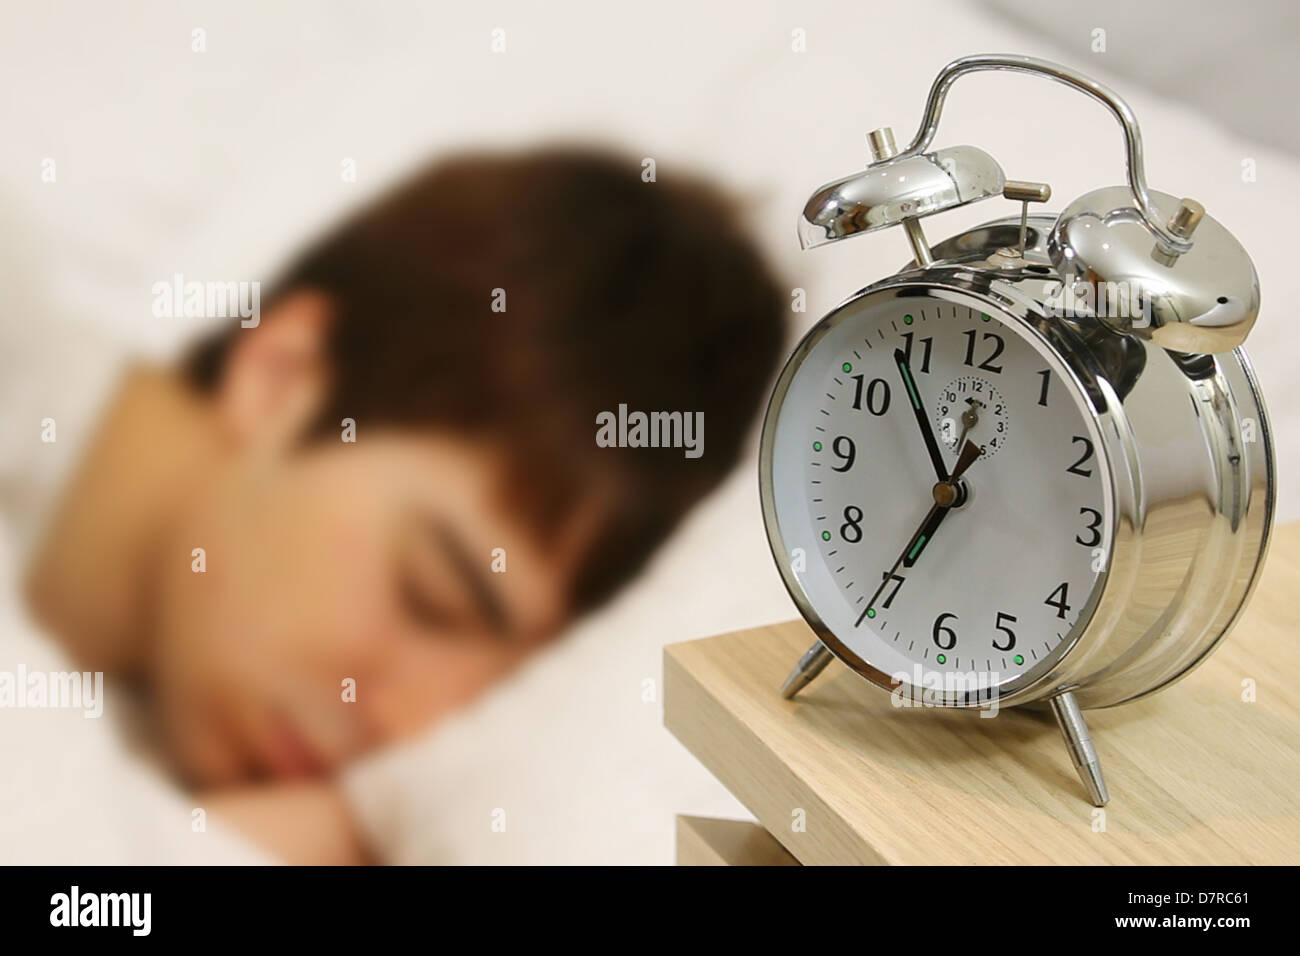 Young male adult asleep in bed, an alarm clock by his bed just before 7am. The alarm is just about to ring. Stock Photo